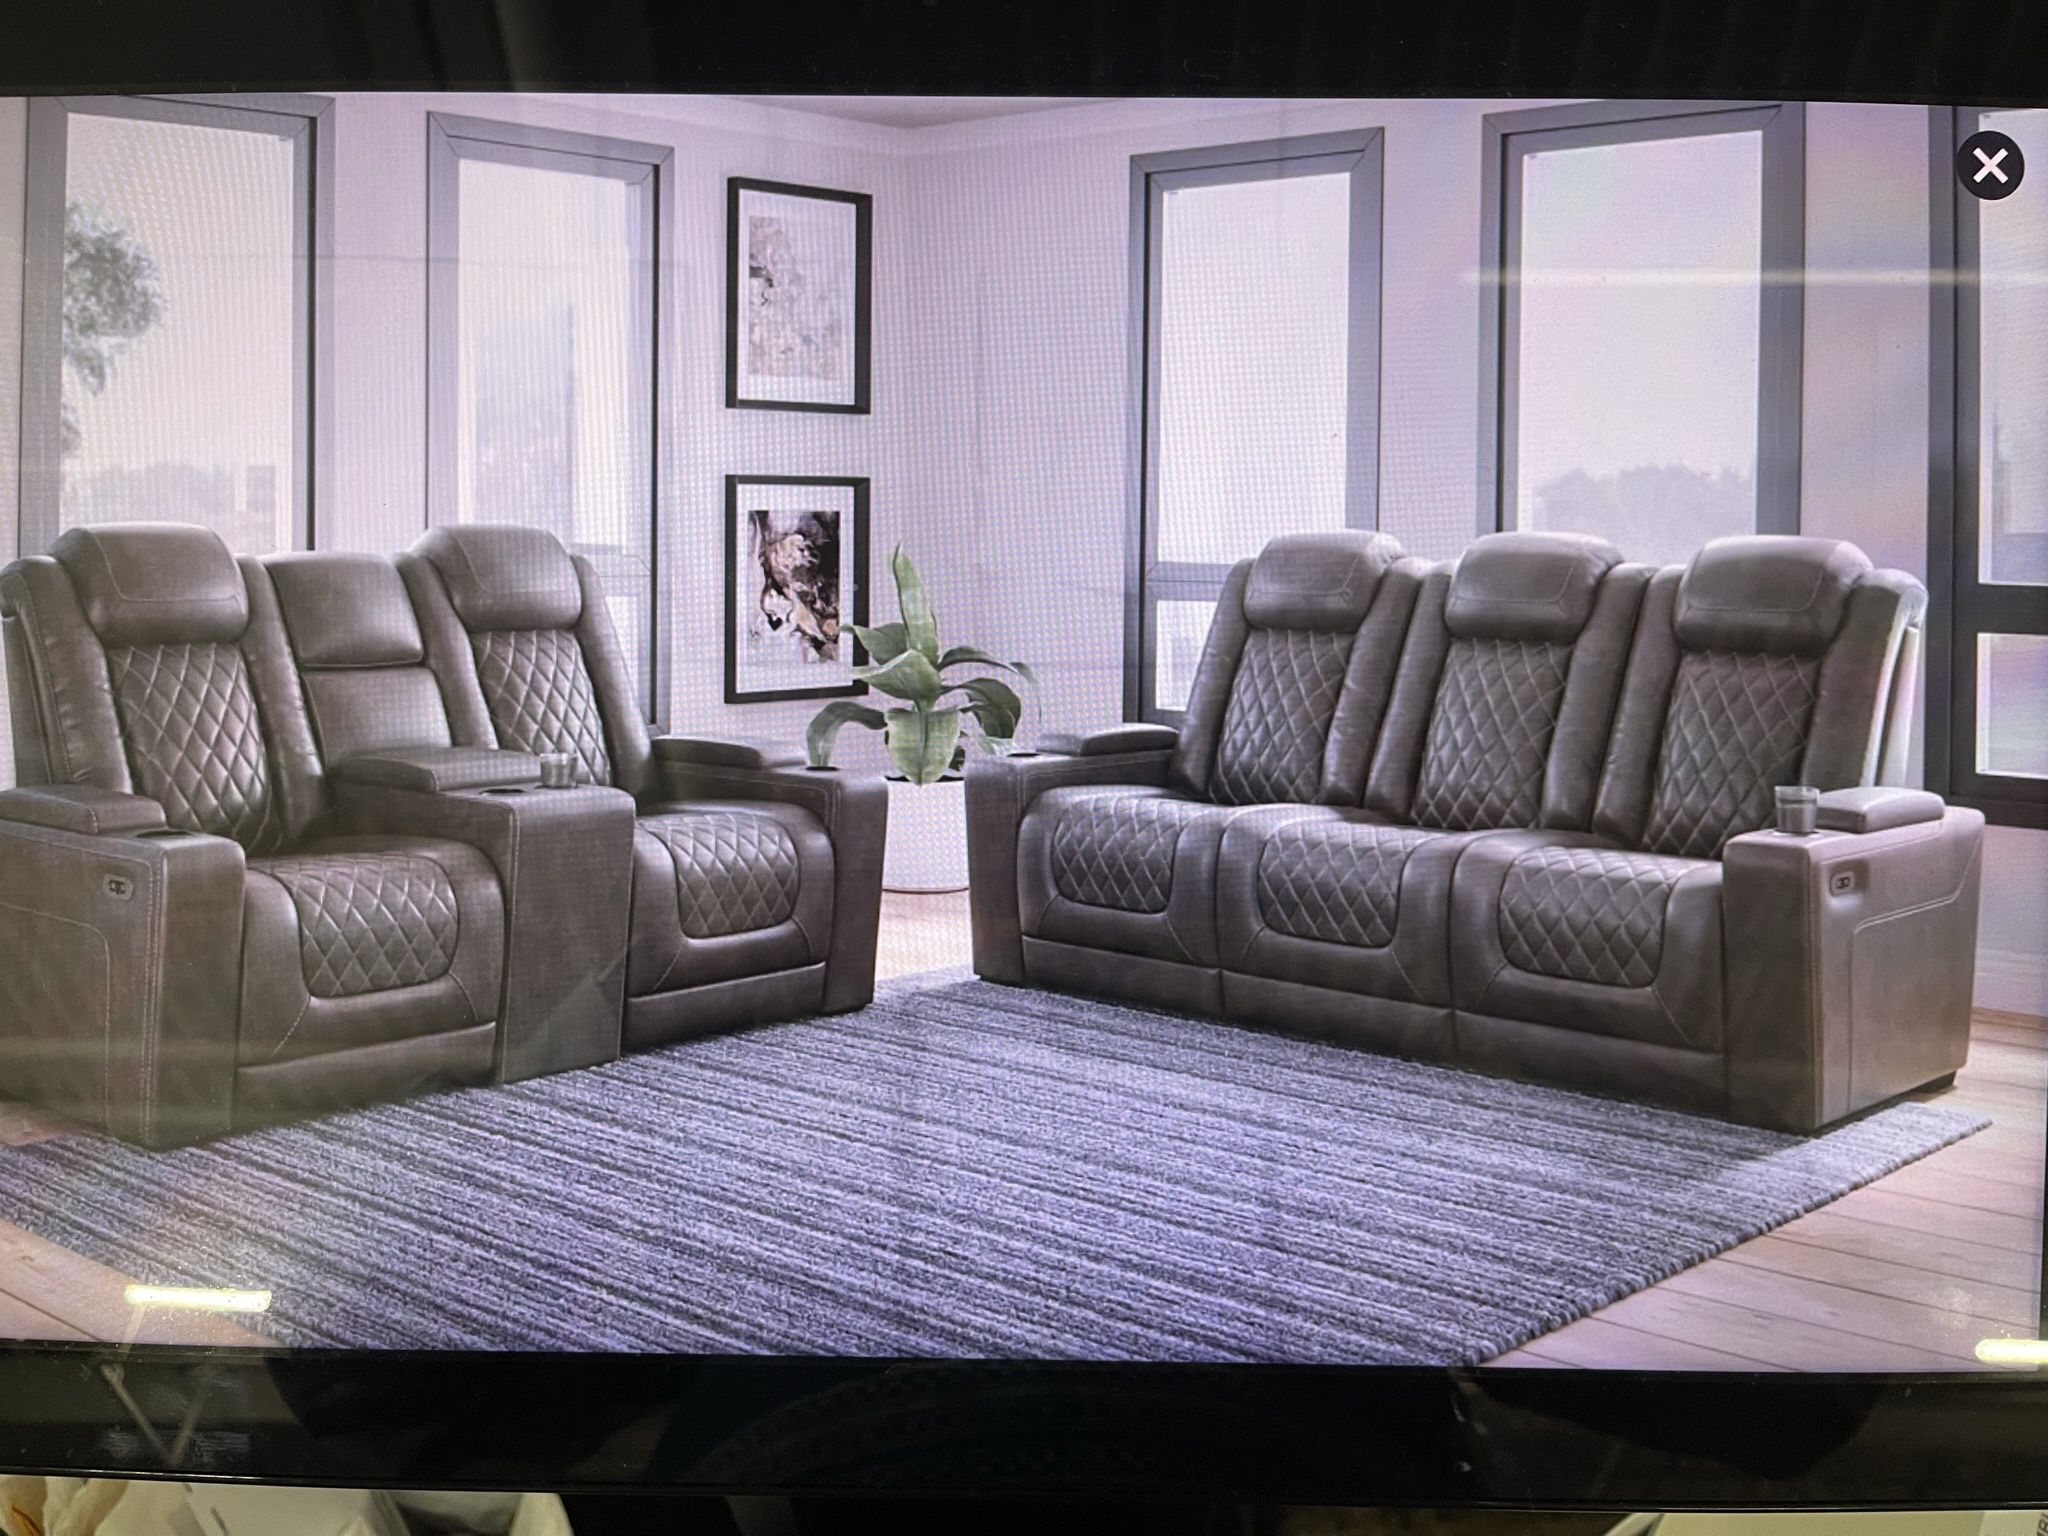 Power Reclining Sofa And Power Reclining Love Seat On Sale